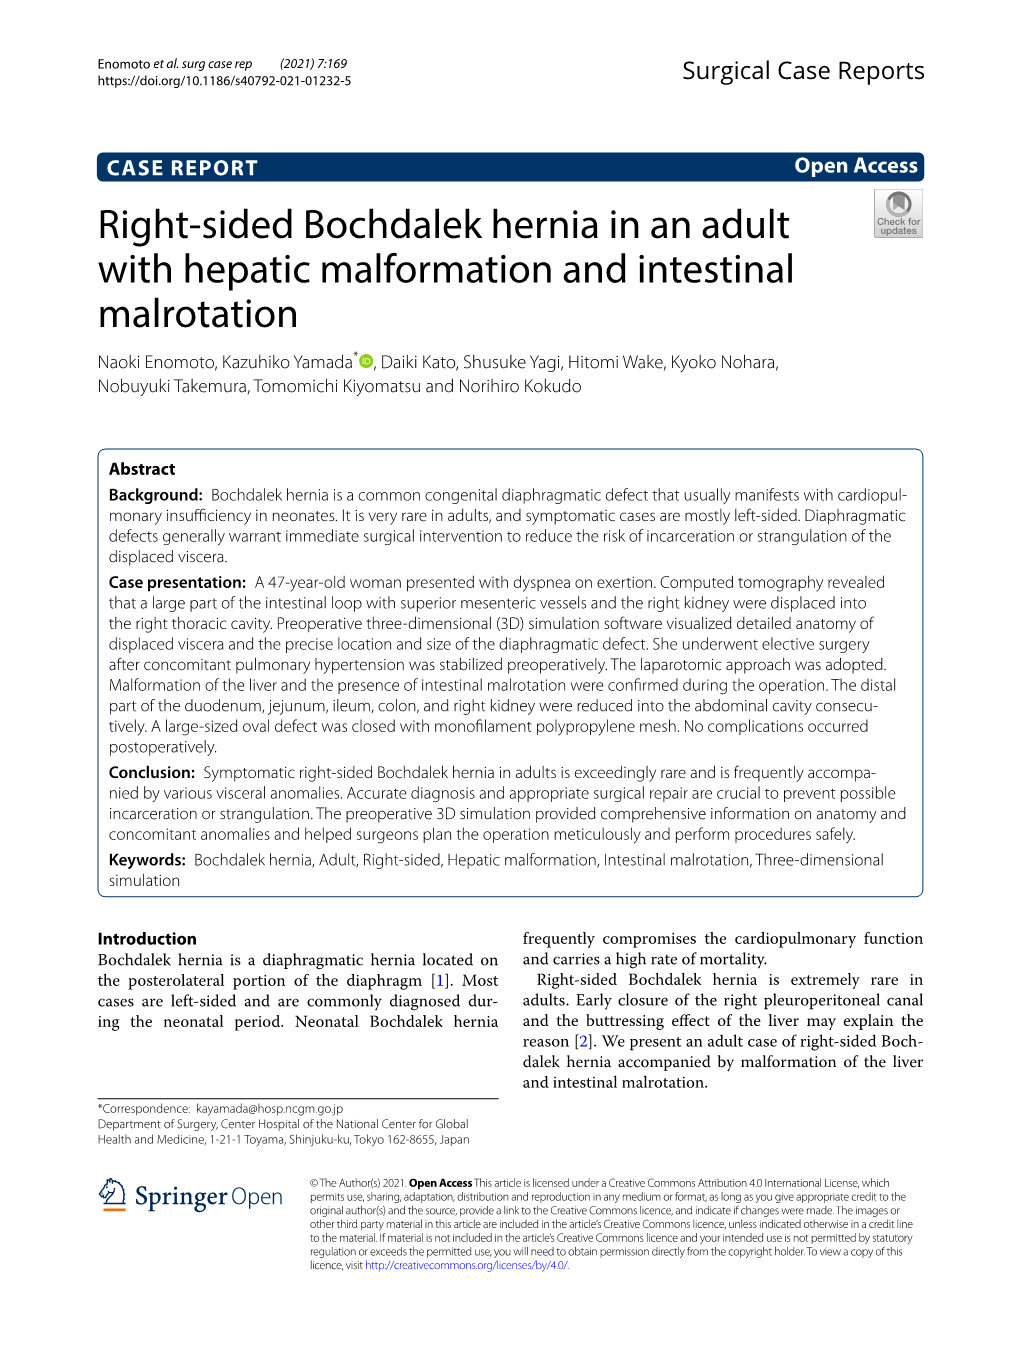 Right-Sided Bochdalek Hernia in an Adult with Hepatic Malformation And